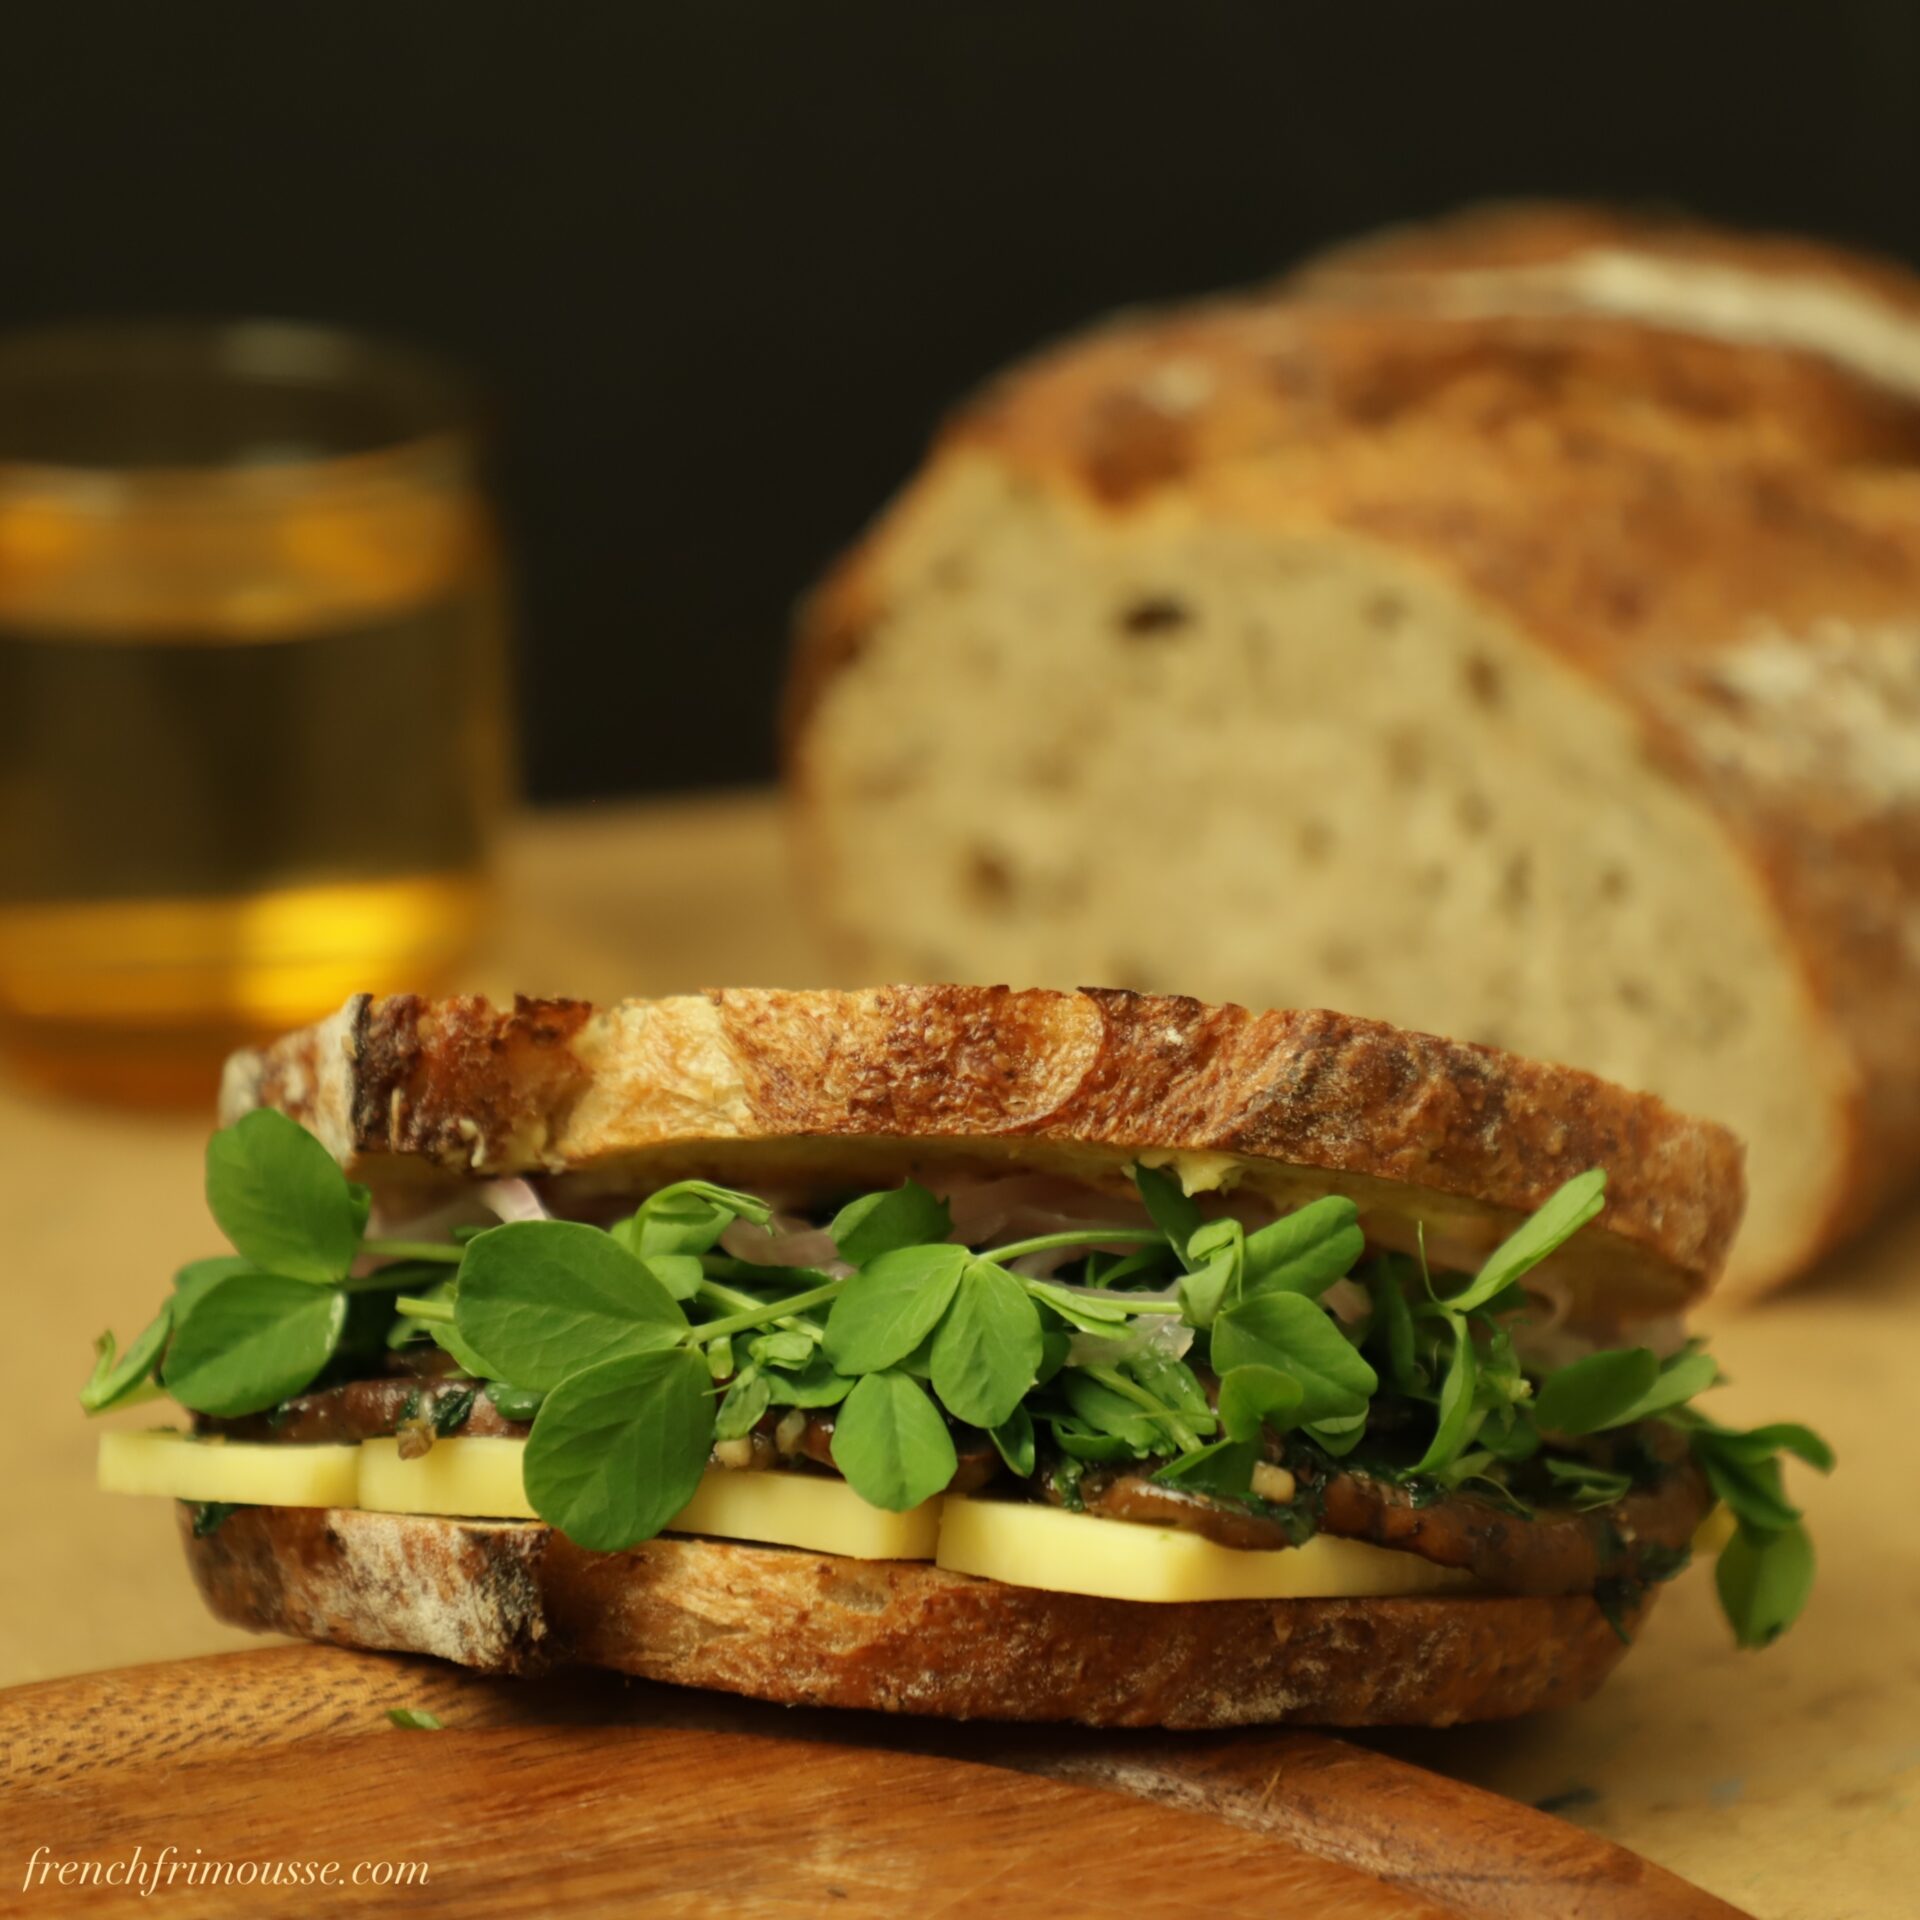 Side view of Portobello Sandwich with pea shoots jutting out, a sourdough loaf and a yellow glass cup in the background.